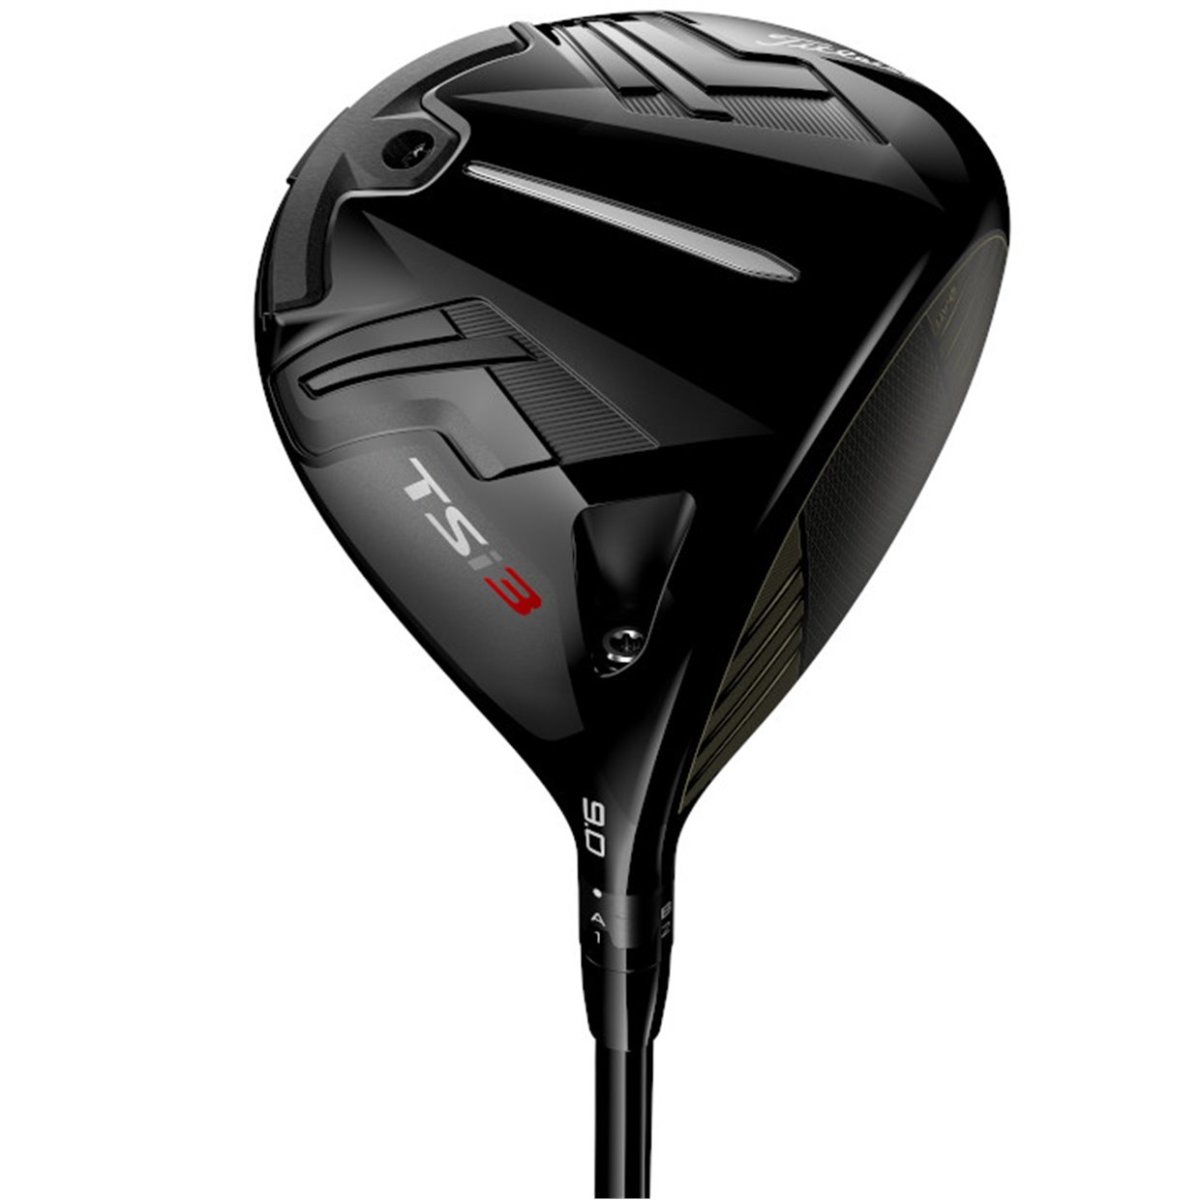 Shop the latest Titleist drivers - like the TSi3 - on Morning Read's Pro Shop.